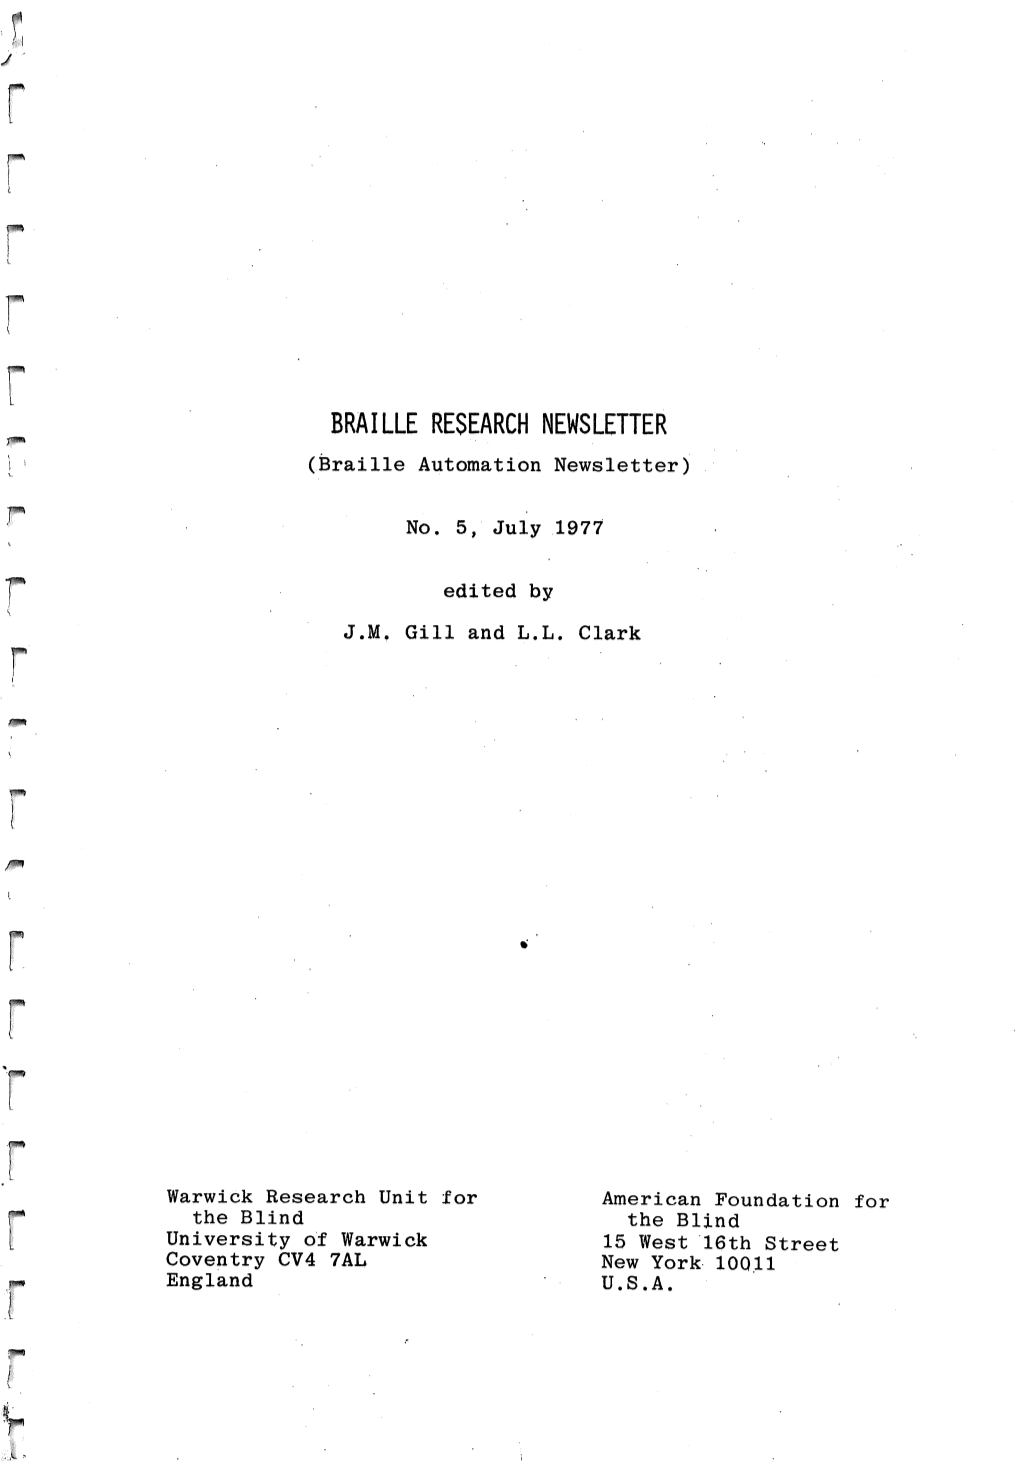 Braille Research Newsletter #5, July 1977